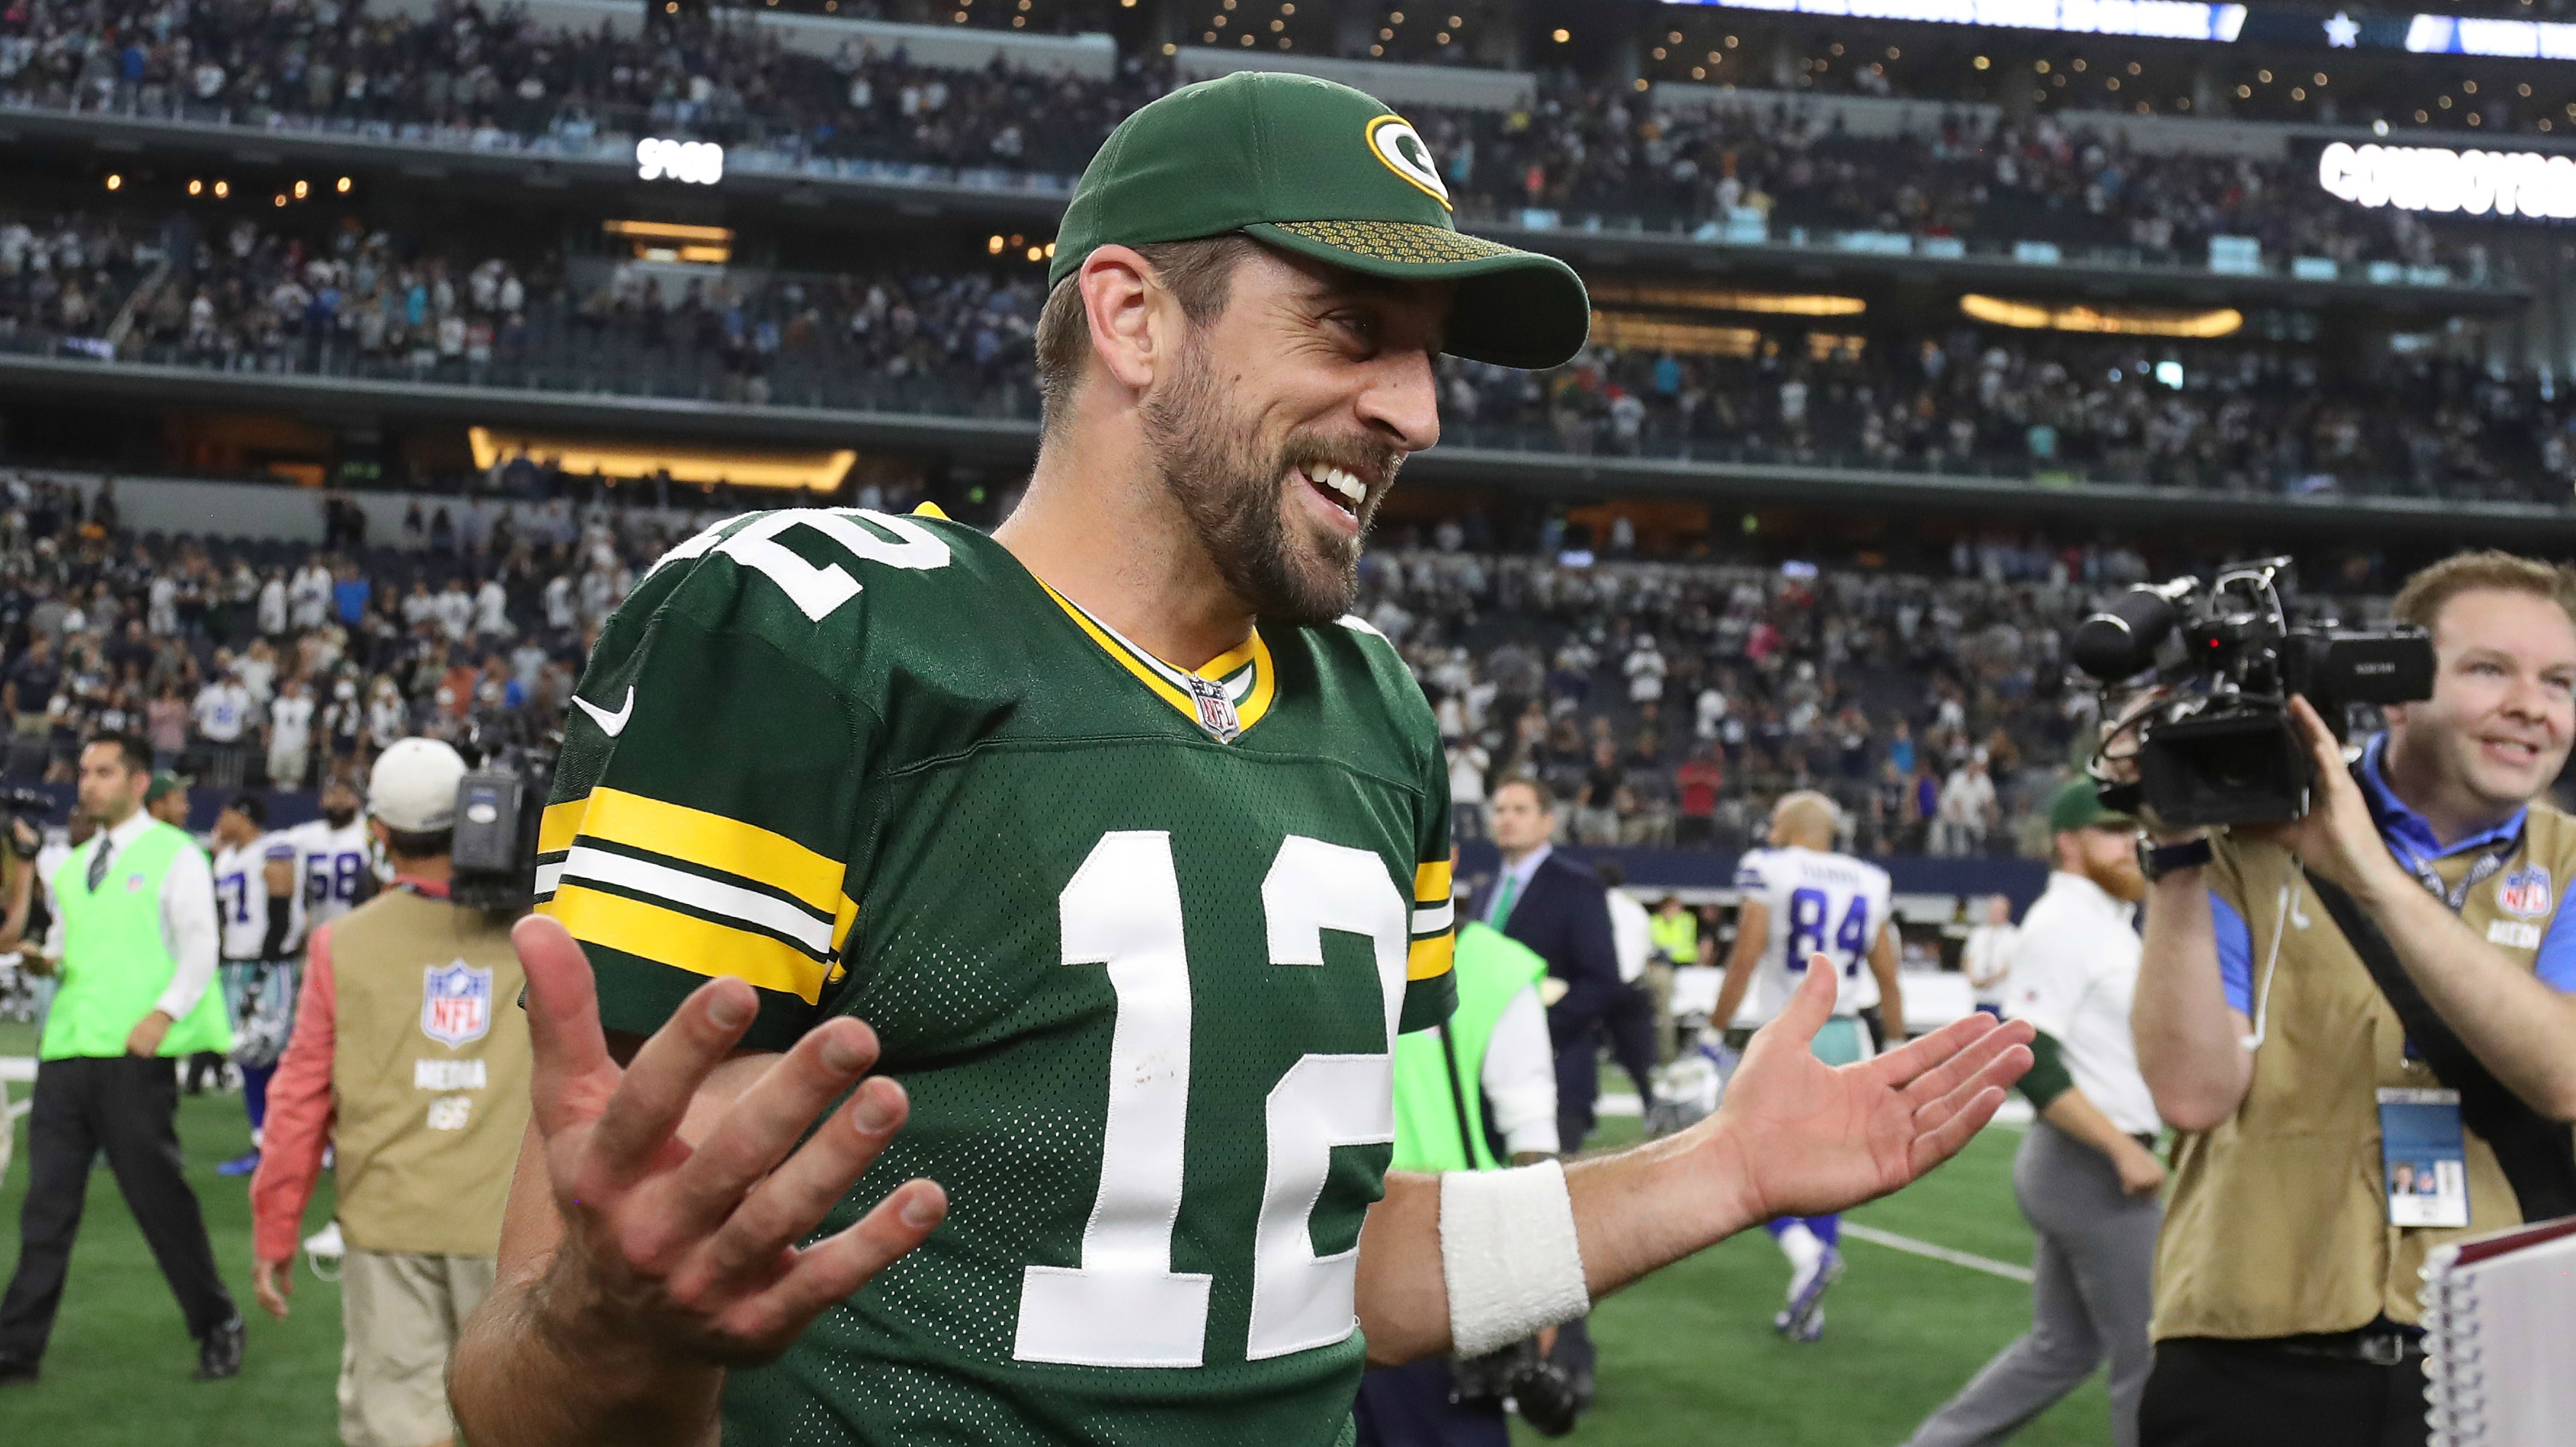 Green Bay Packers beat Dallas Cowboys on final play in NFL playoff thriller, NFL